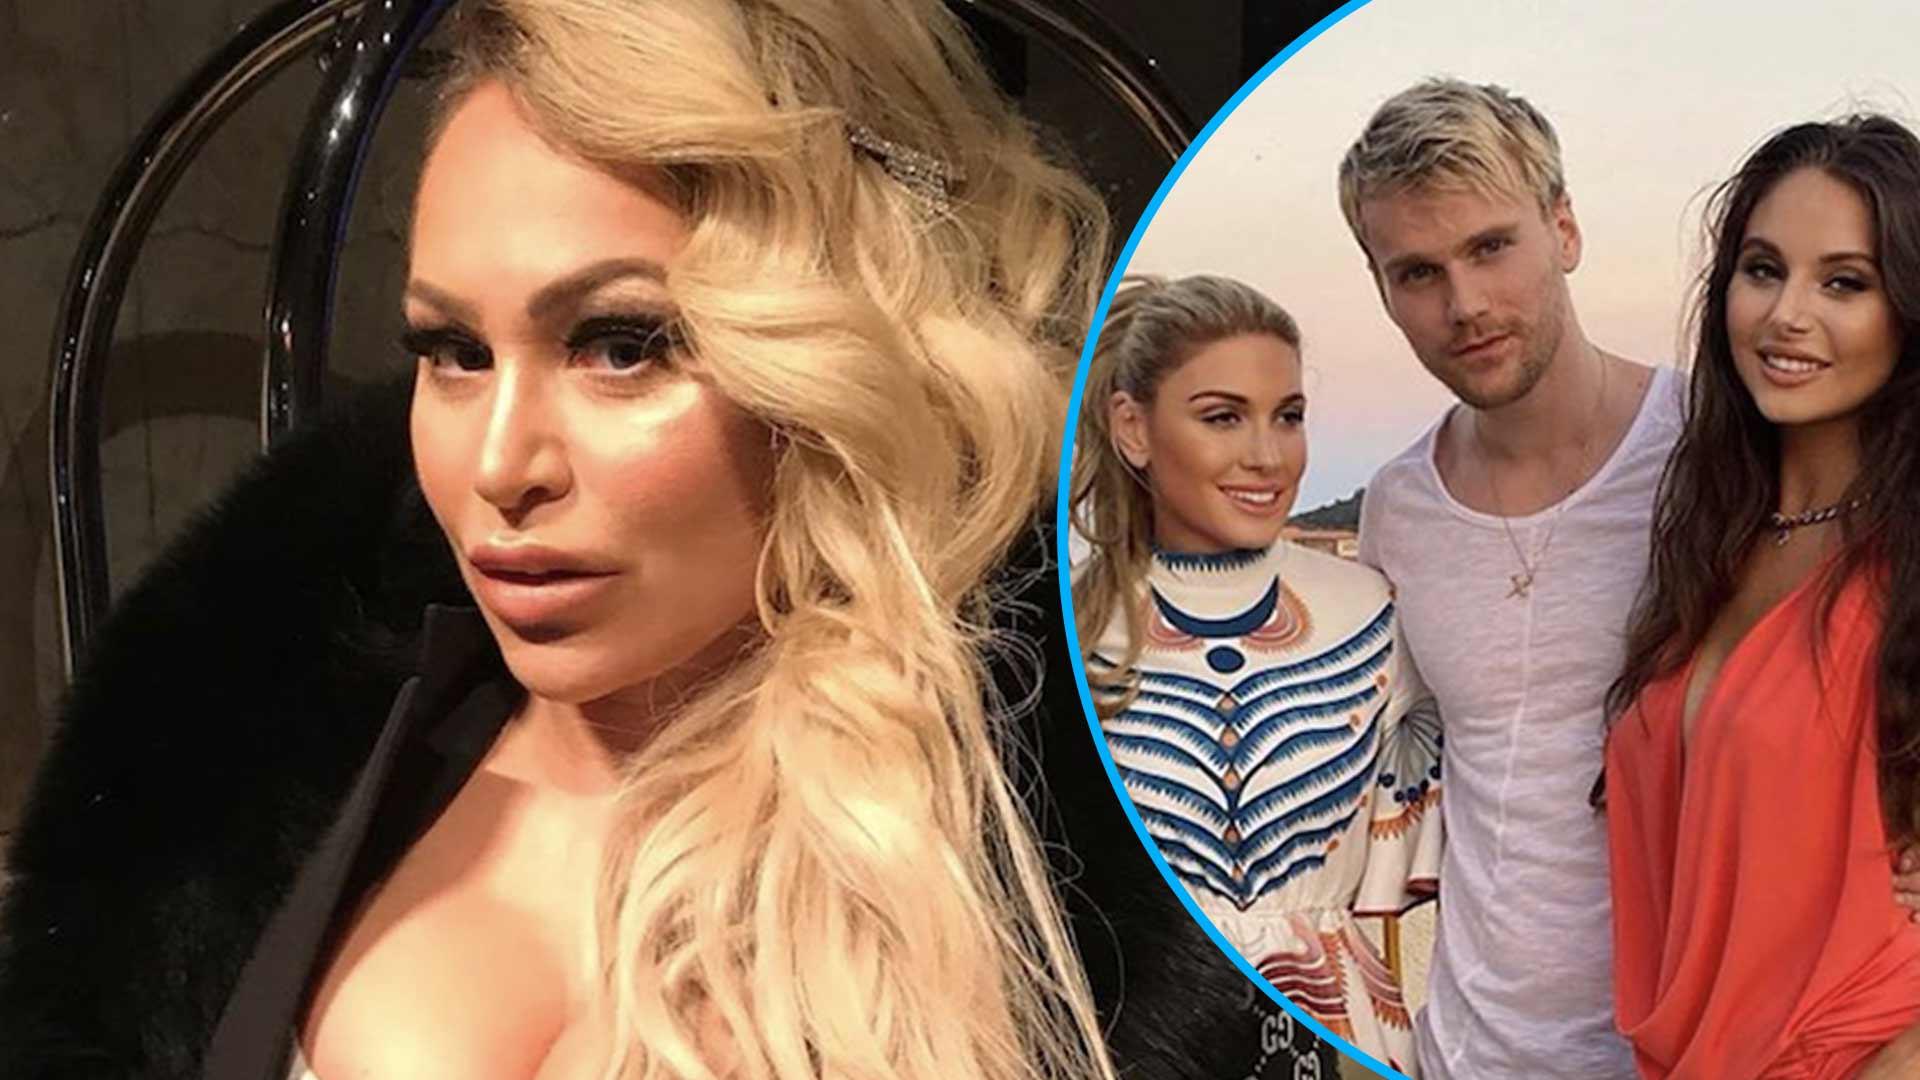 ’90 Day Fiancé’ Star Darcey Silva’s Ex Jesse Meester Swarmed By Beauties After Spin-Off Diss